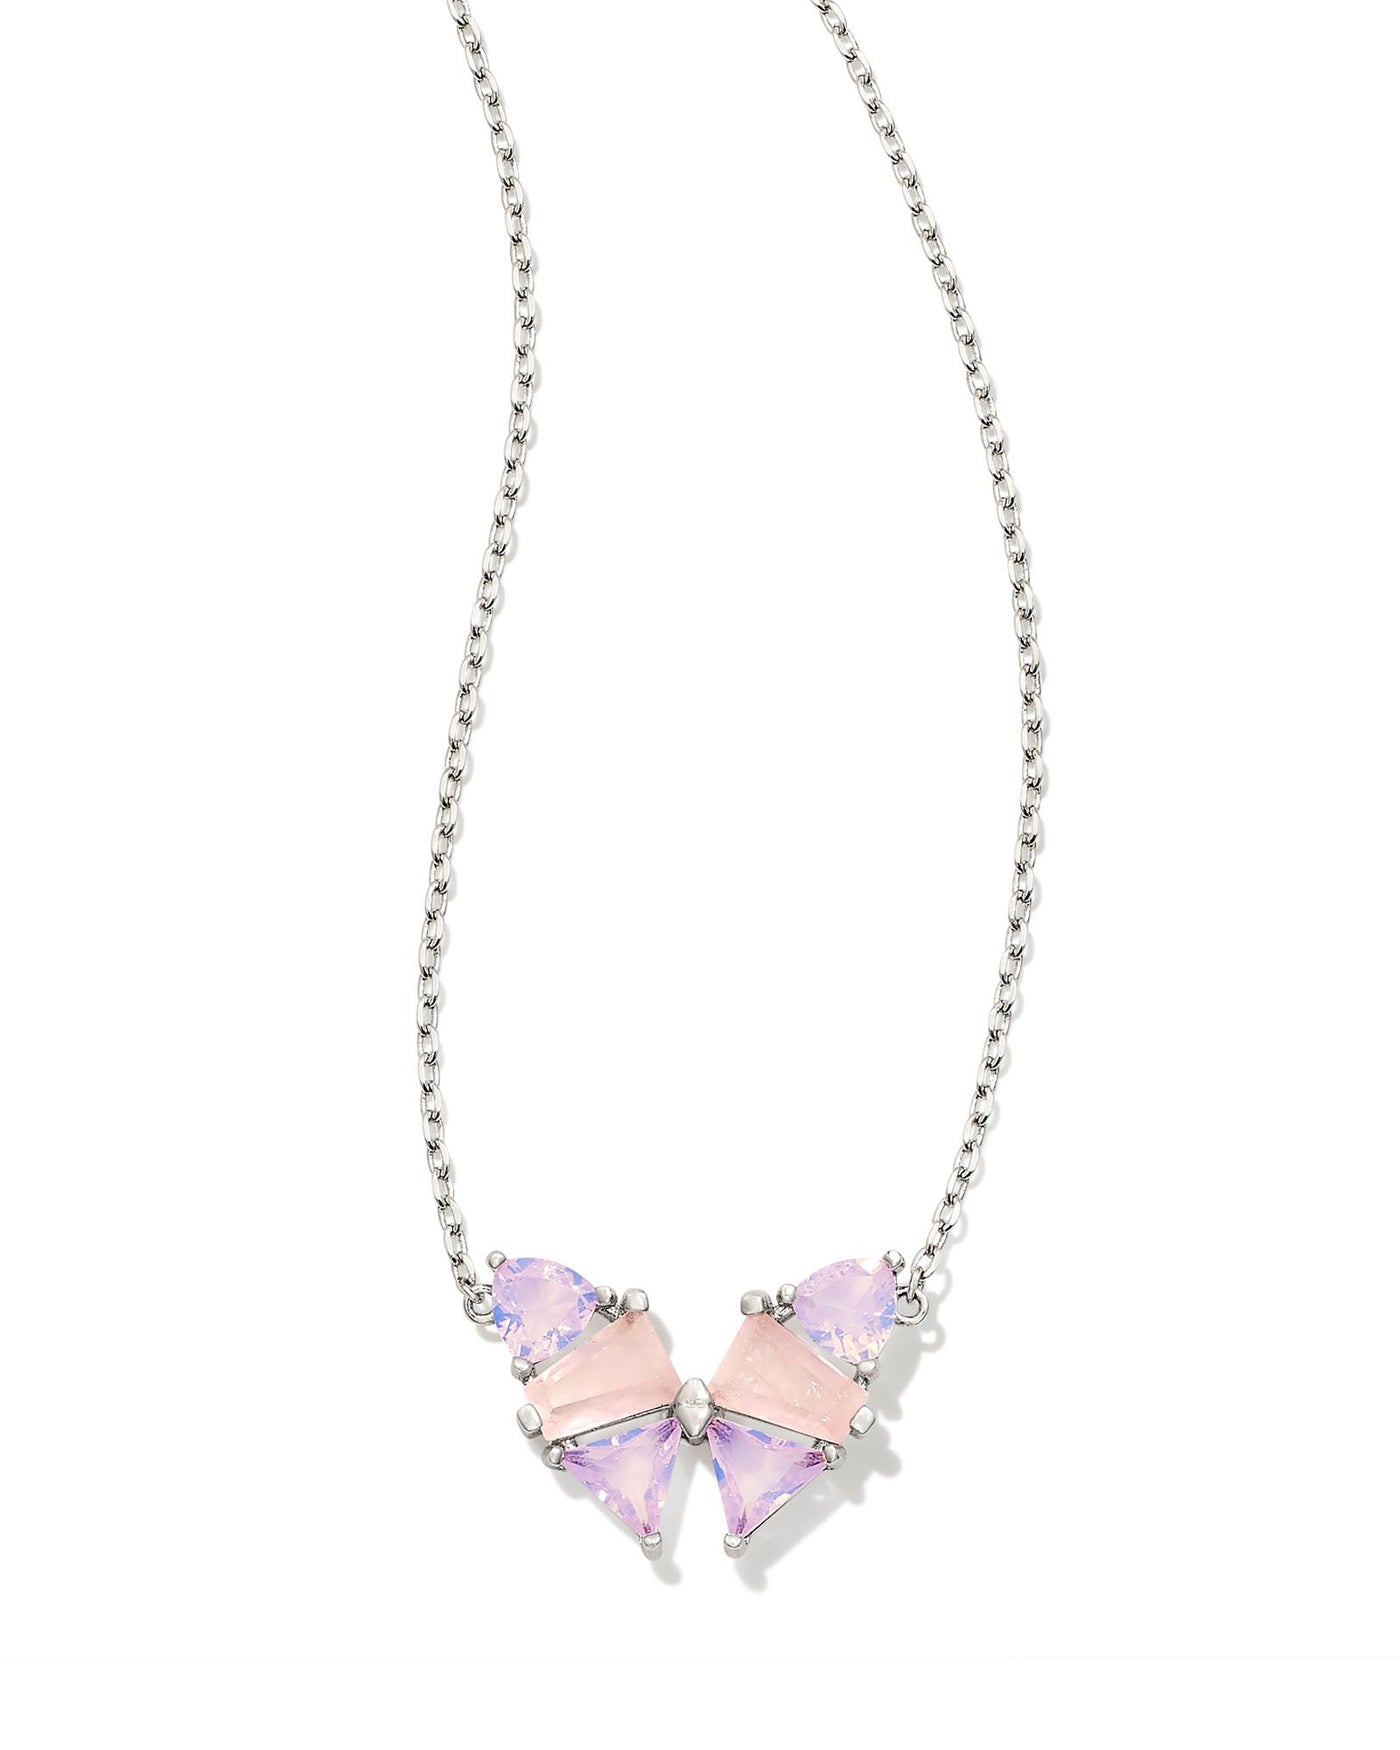 Kendra Scott Blair Butterfly Pendant Necklace-Necklaces-Kendra Scott-Market Street Nest, Fashionable Clothing, Shoes and Home Décor Located in Mabank, TX